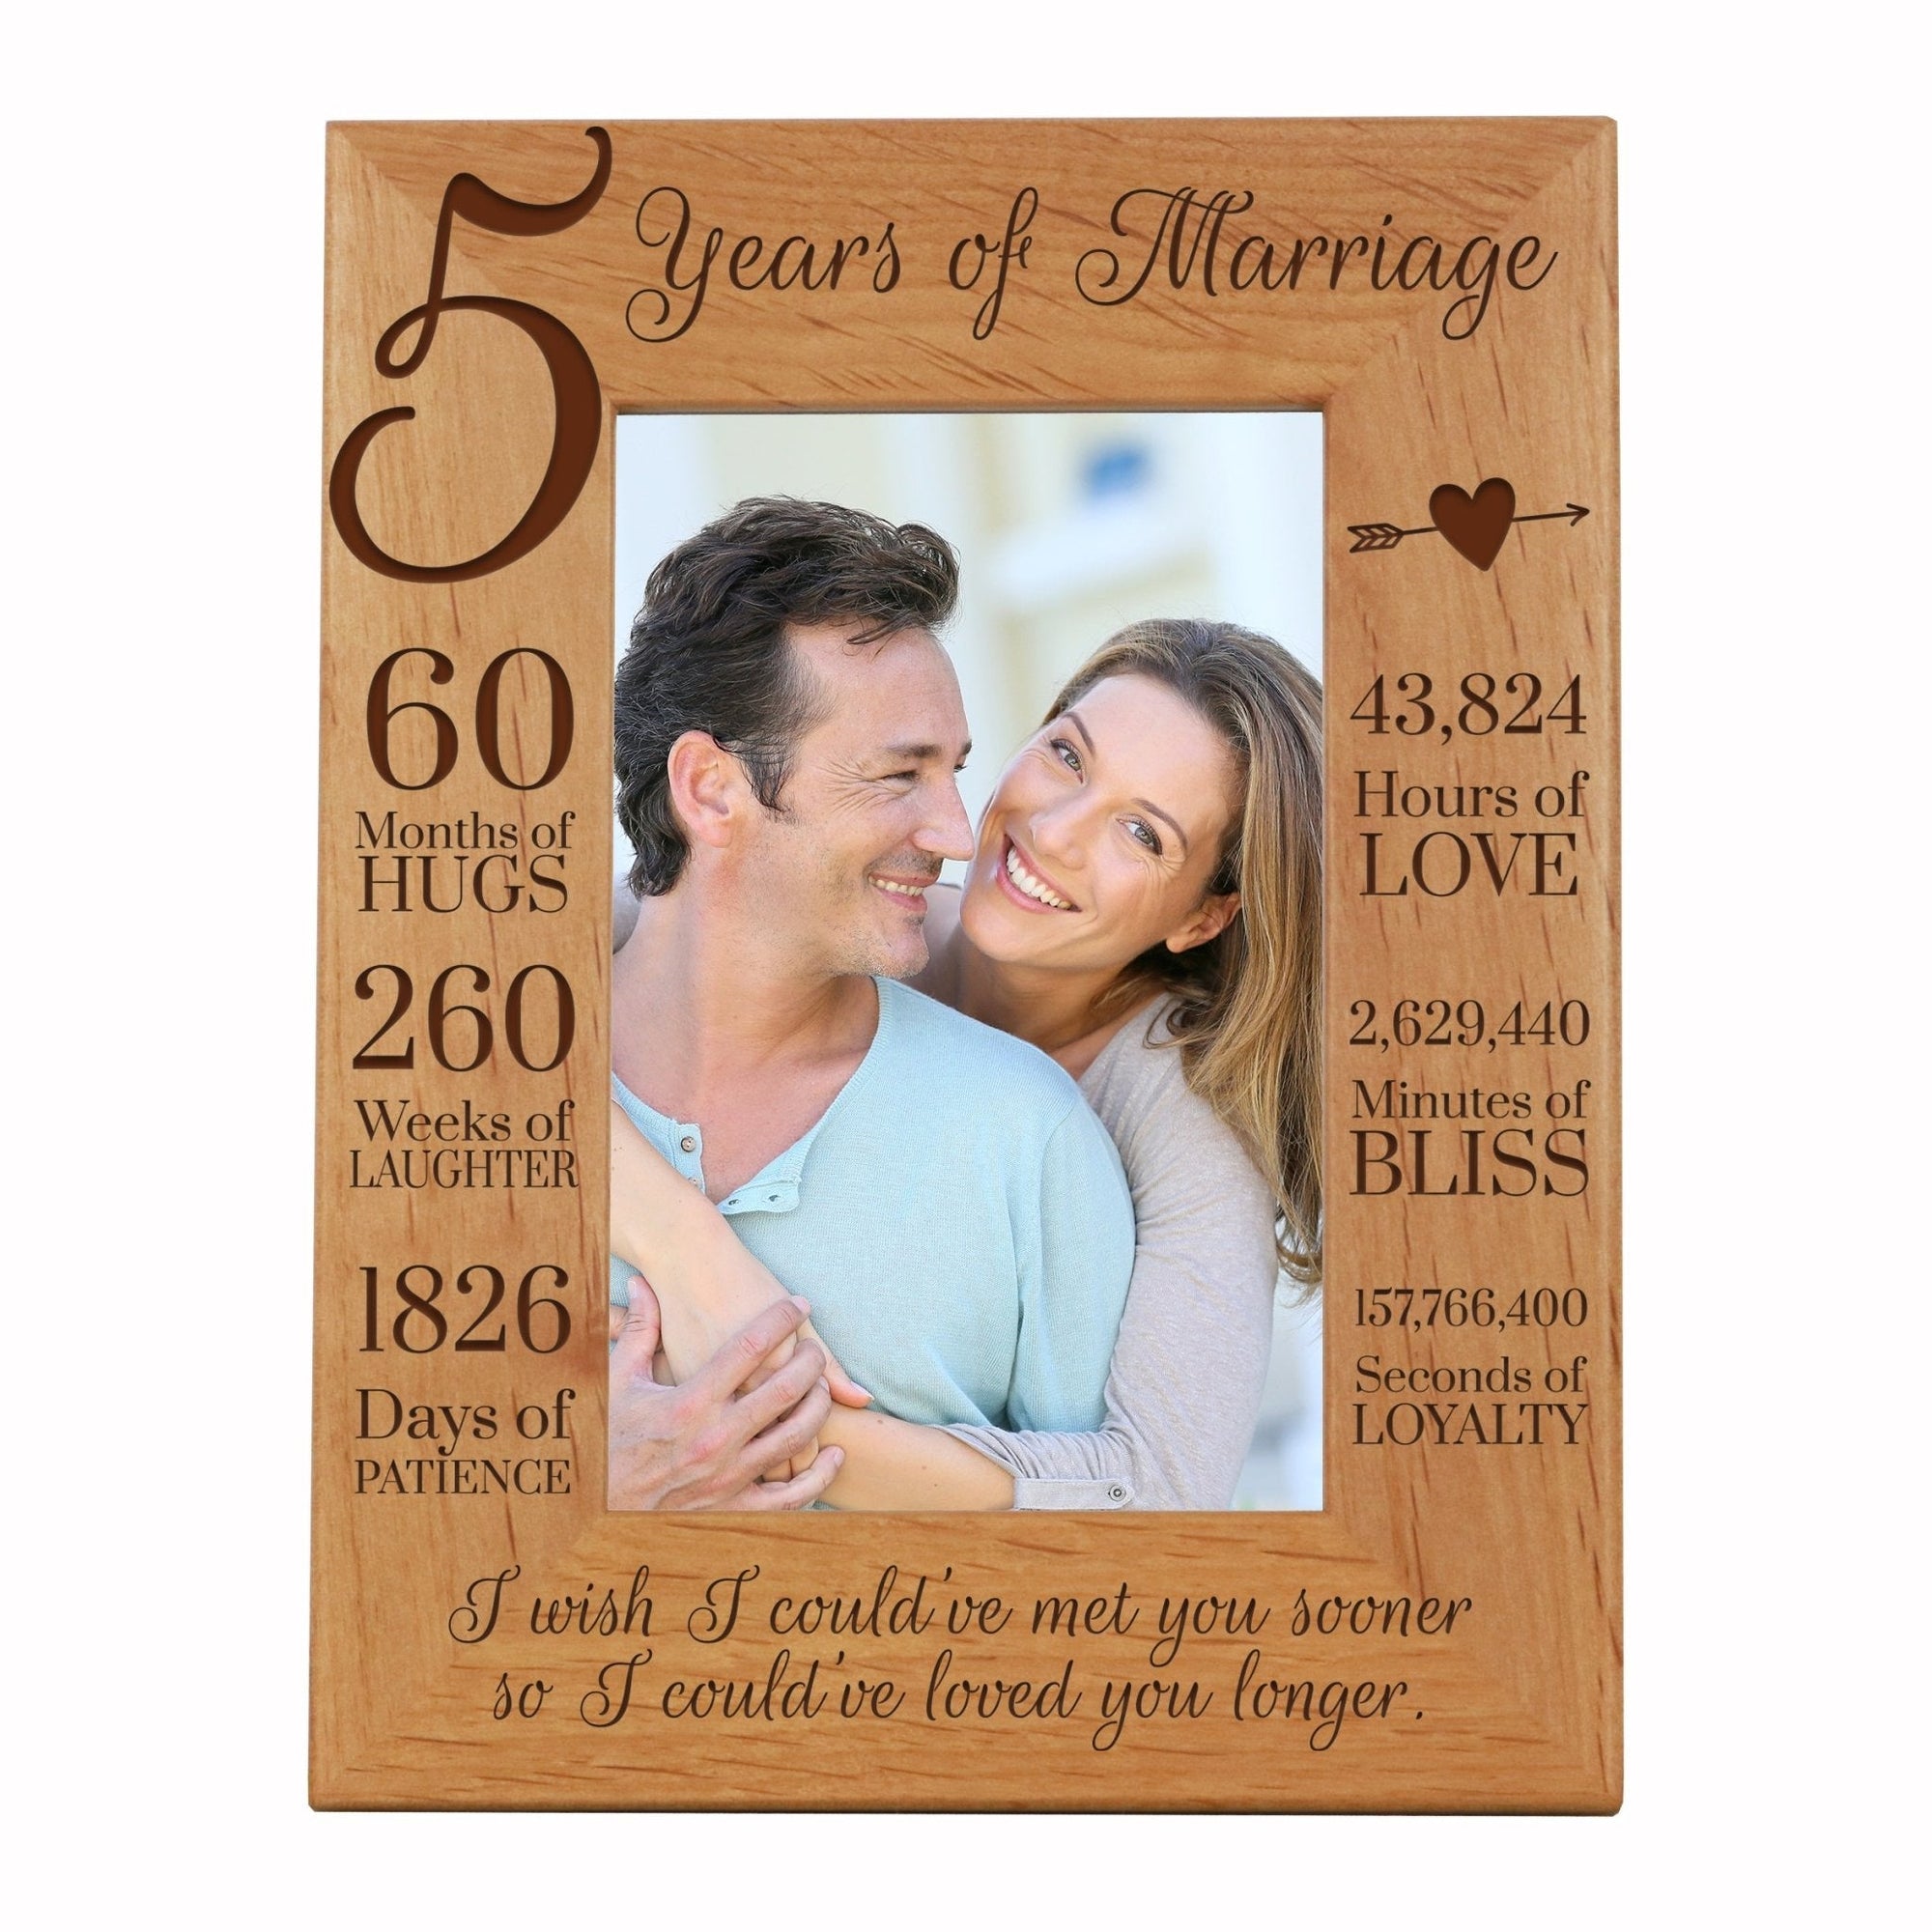 Engraved 5th Wedding Anniversary Photo Frame Wall Decor Gift for Couples - Met You Sooner - LifeSong Milestones